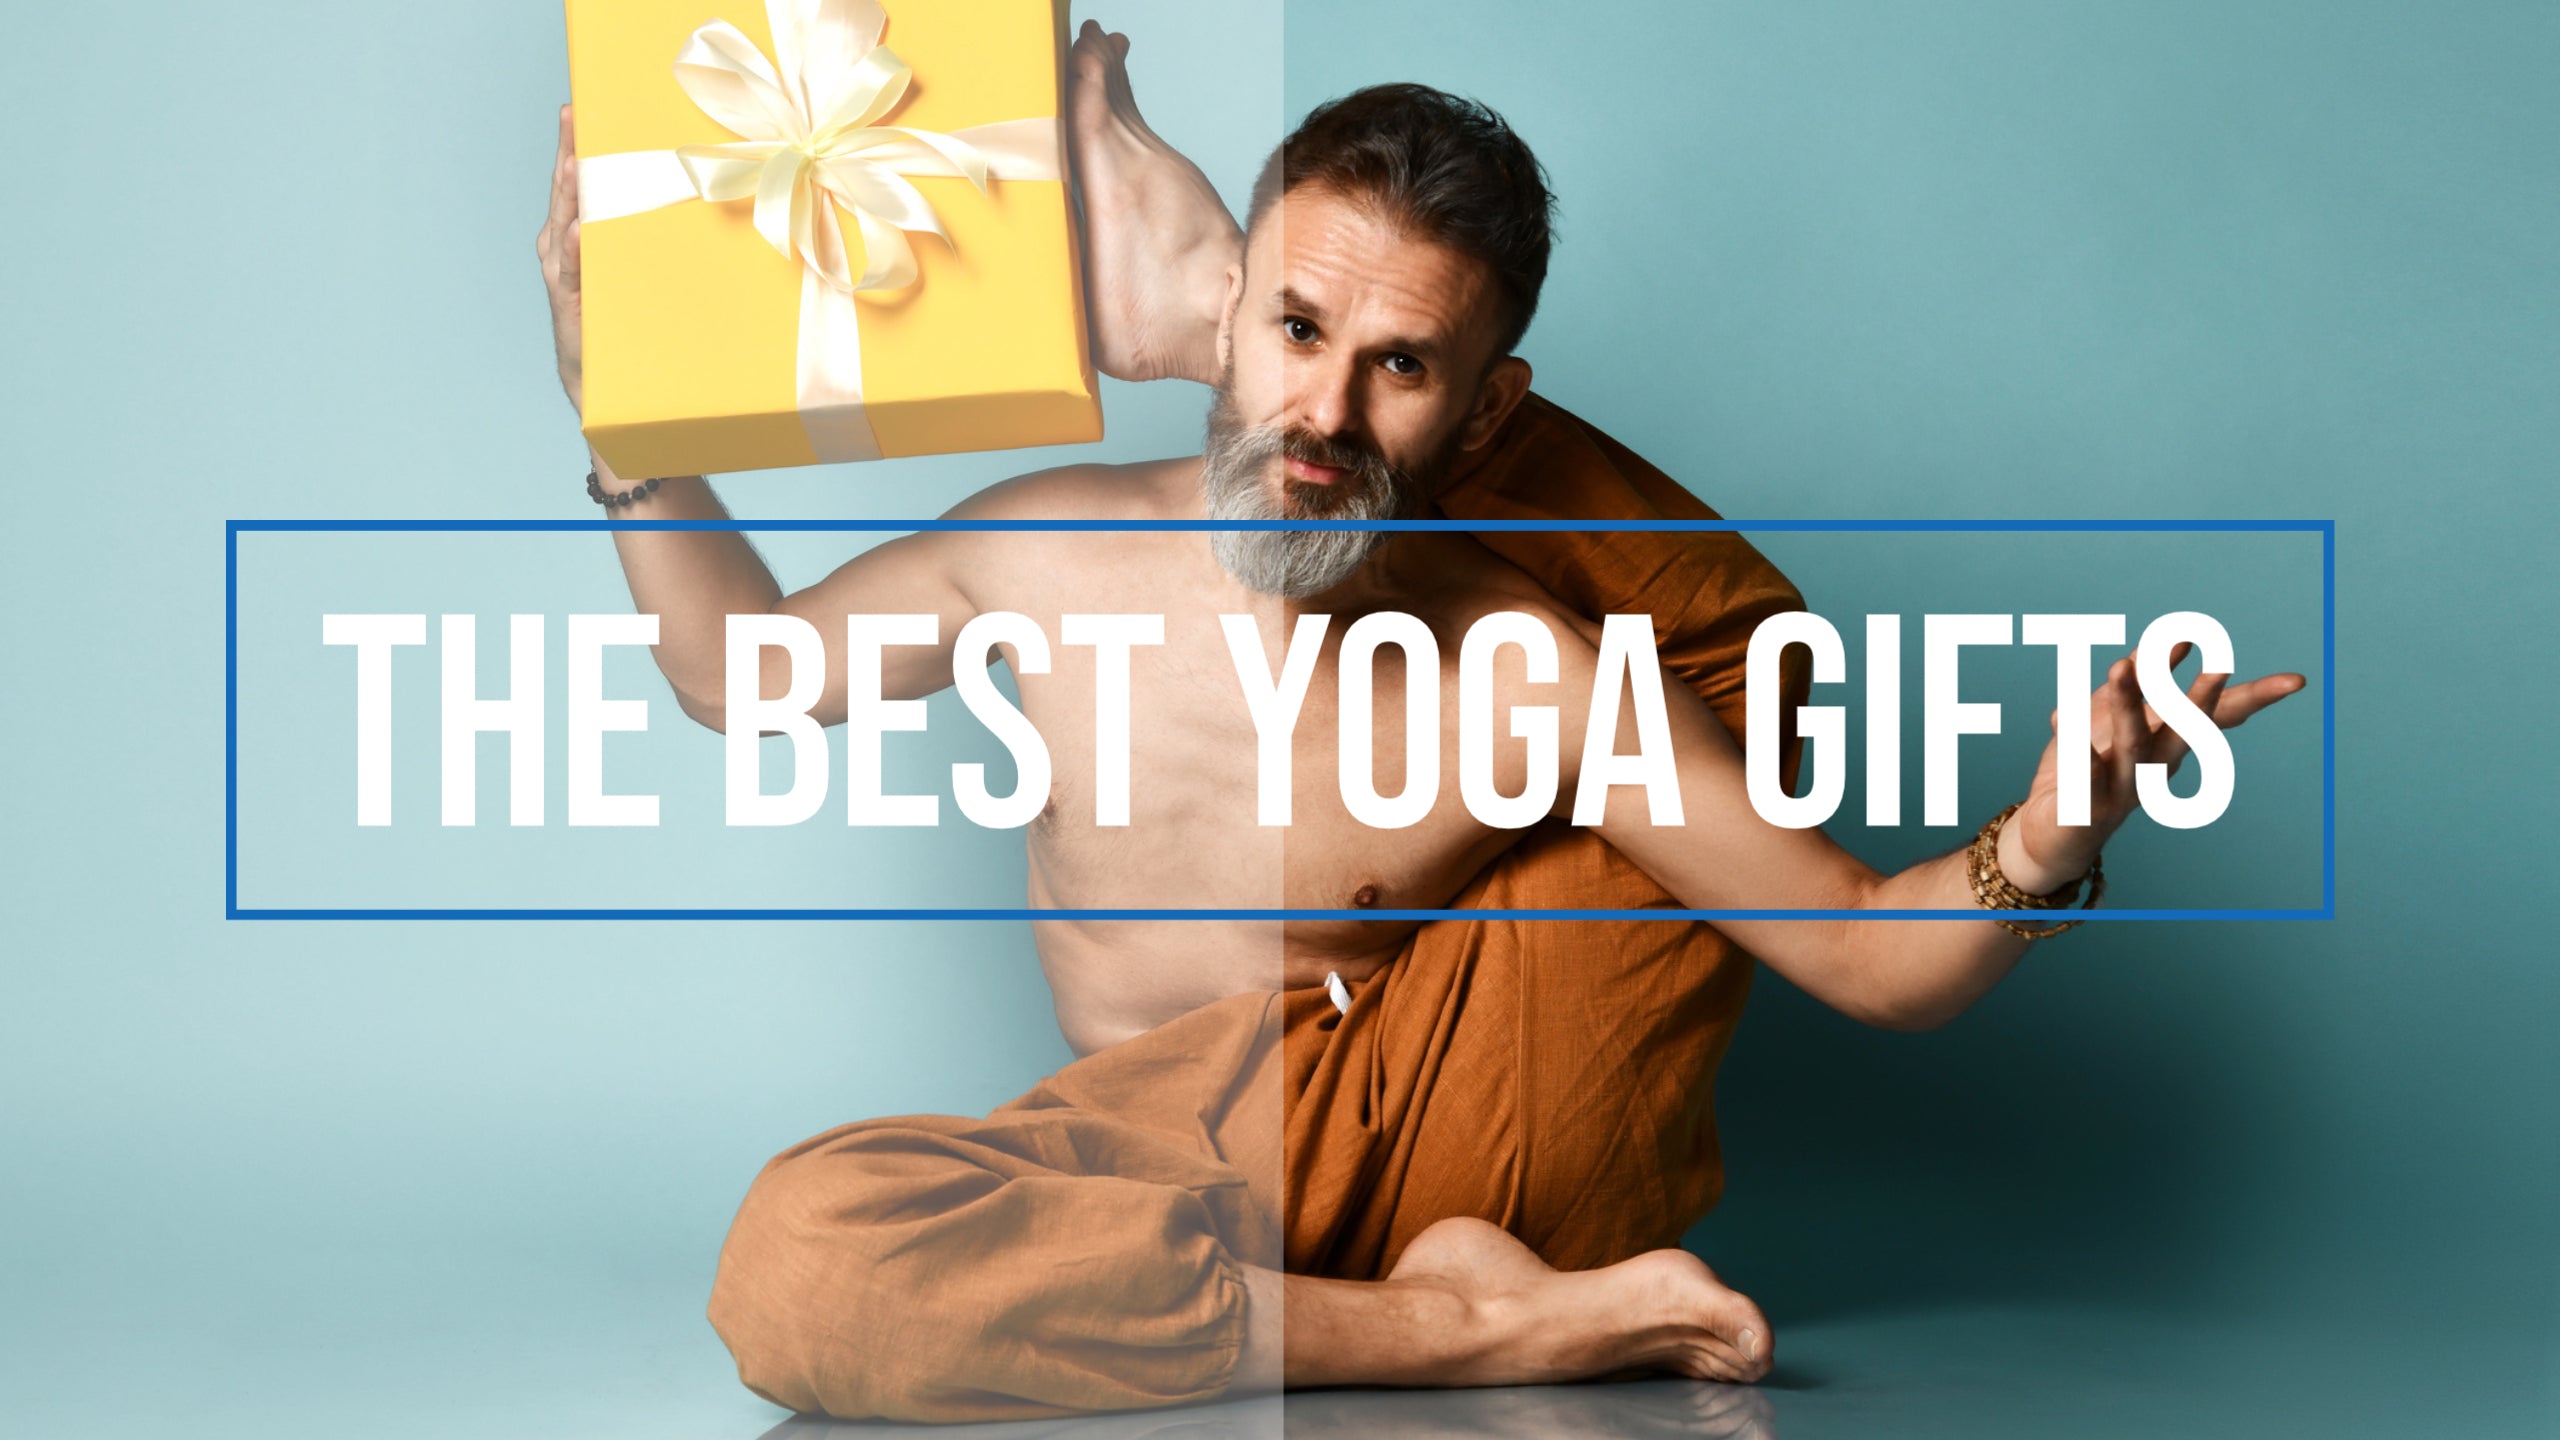 The Best Yoga Gifts - Complete Unity Yoga